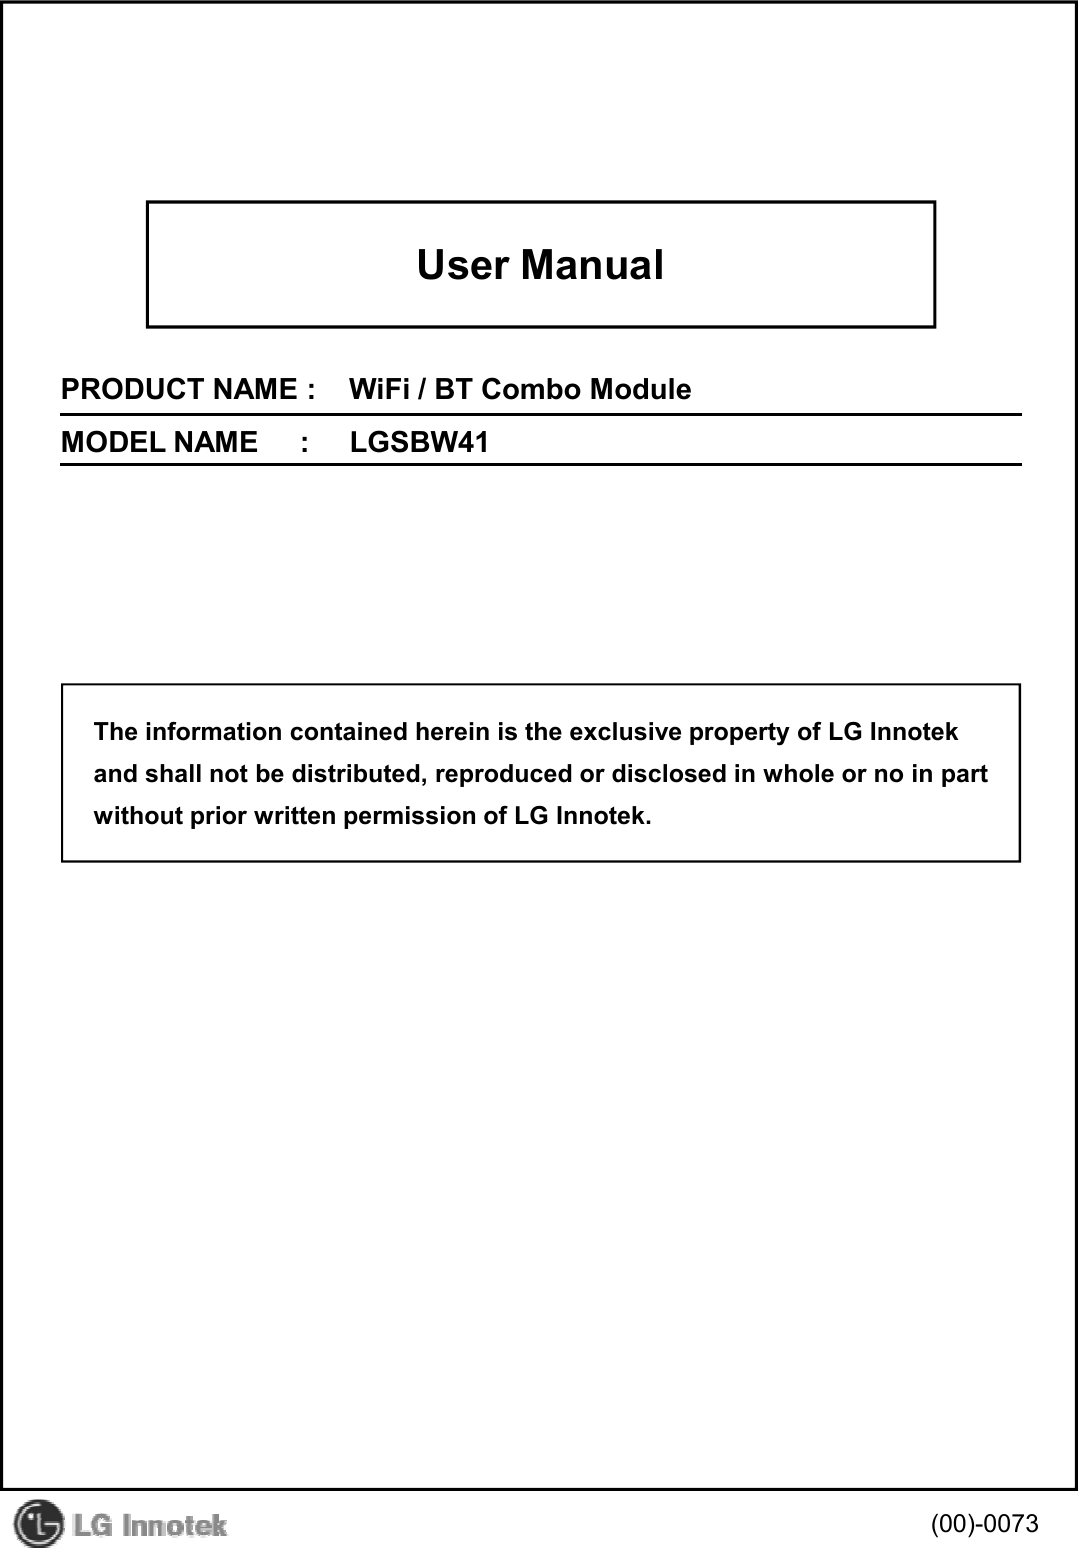 User ManualPRODUCT NAME :    WiFi / BT Combo ModuleMODEL NAME     :     LGSBW41The information contained herein is the exclusive property of LG Innotek(00)-0073and shall not be distributed, reproduced or disclosed in whole or no in partwithout prior written permission of LG Innotek.